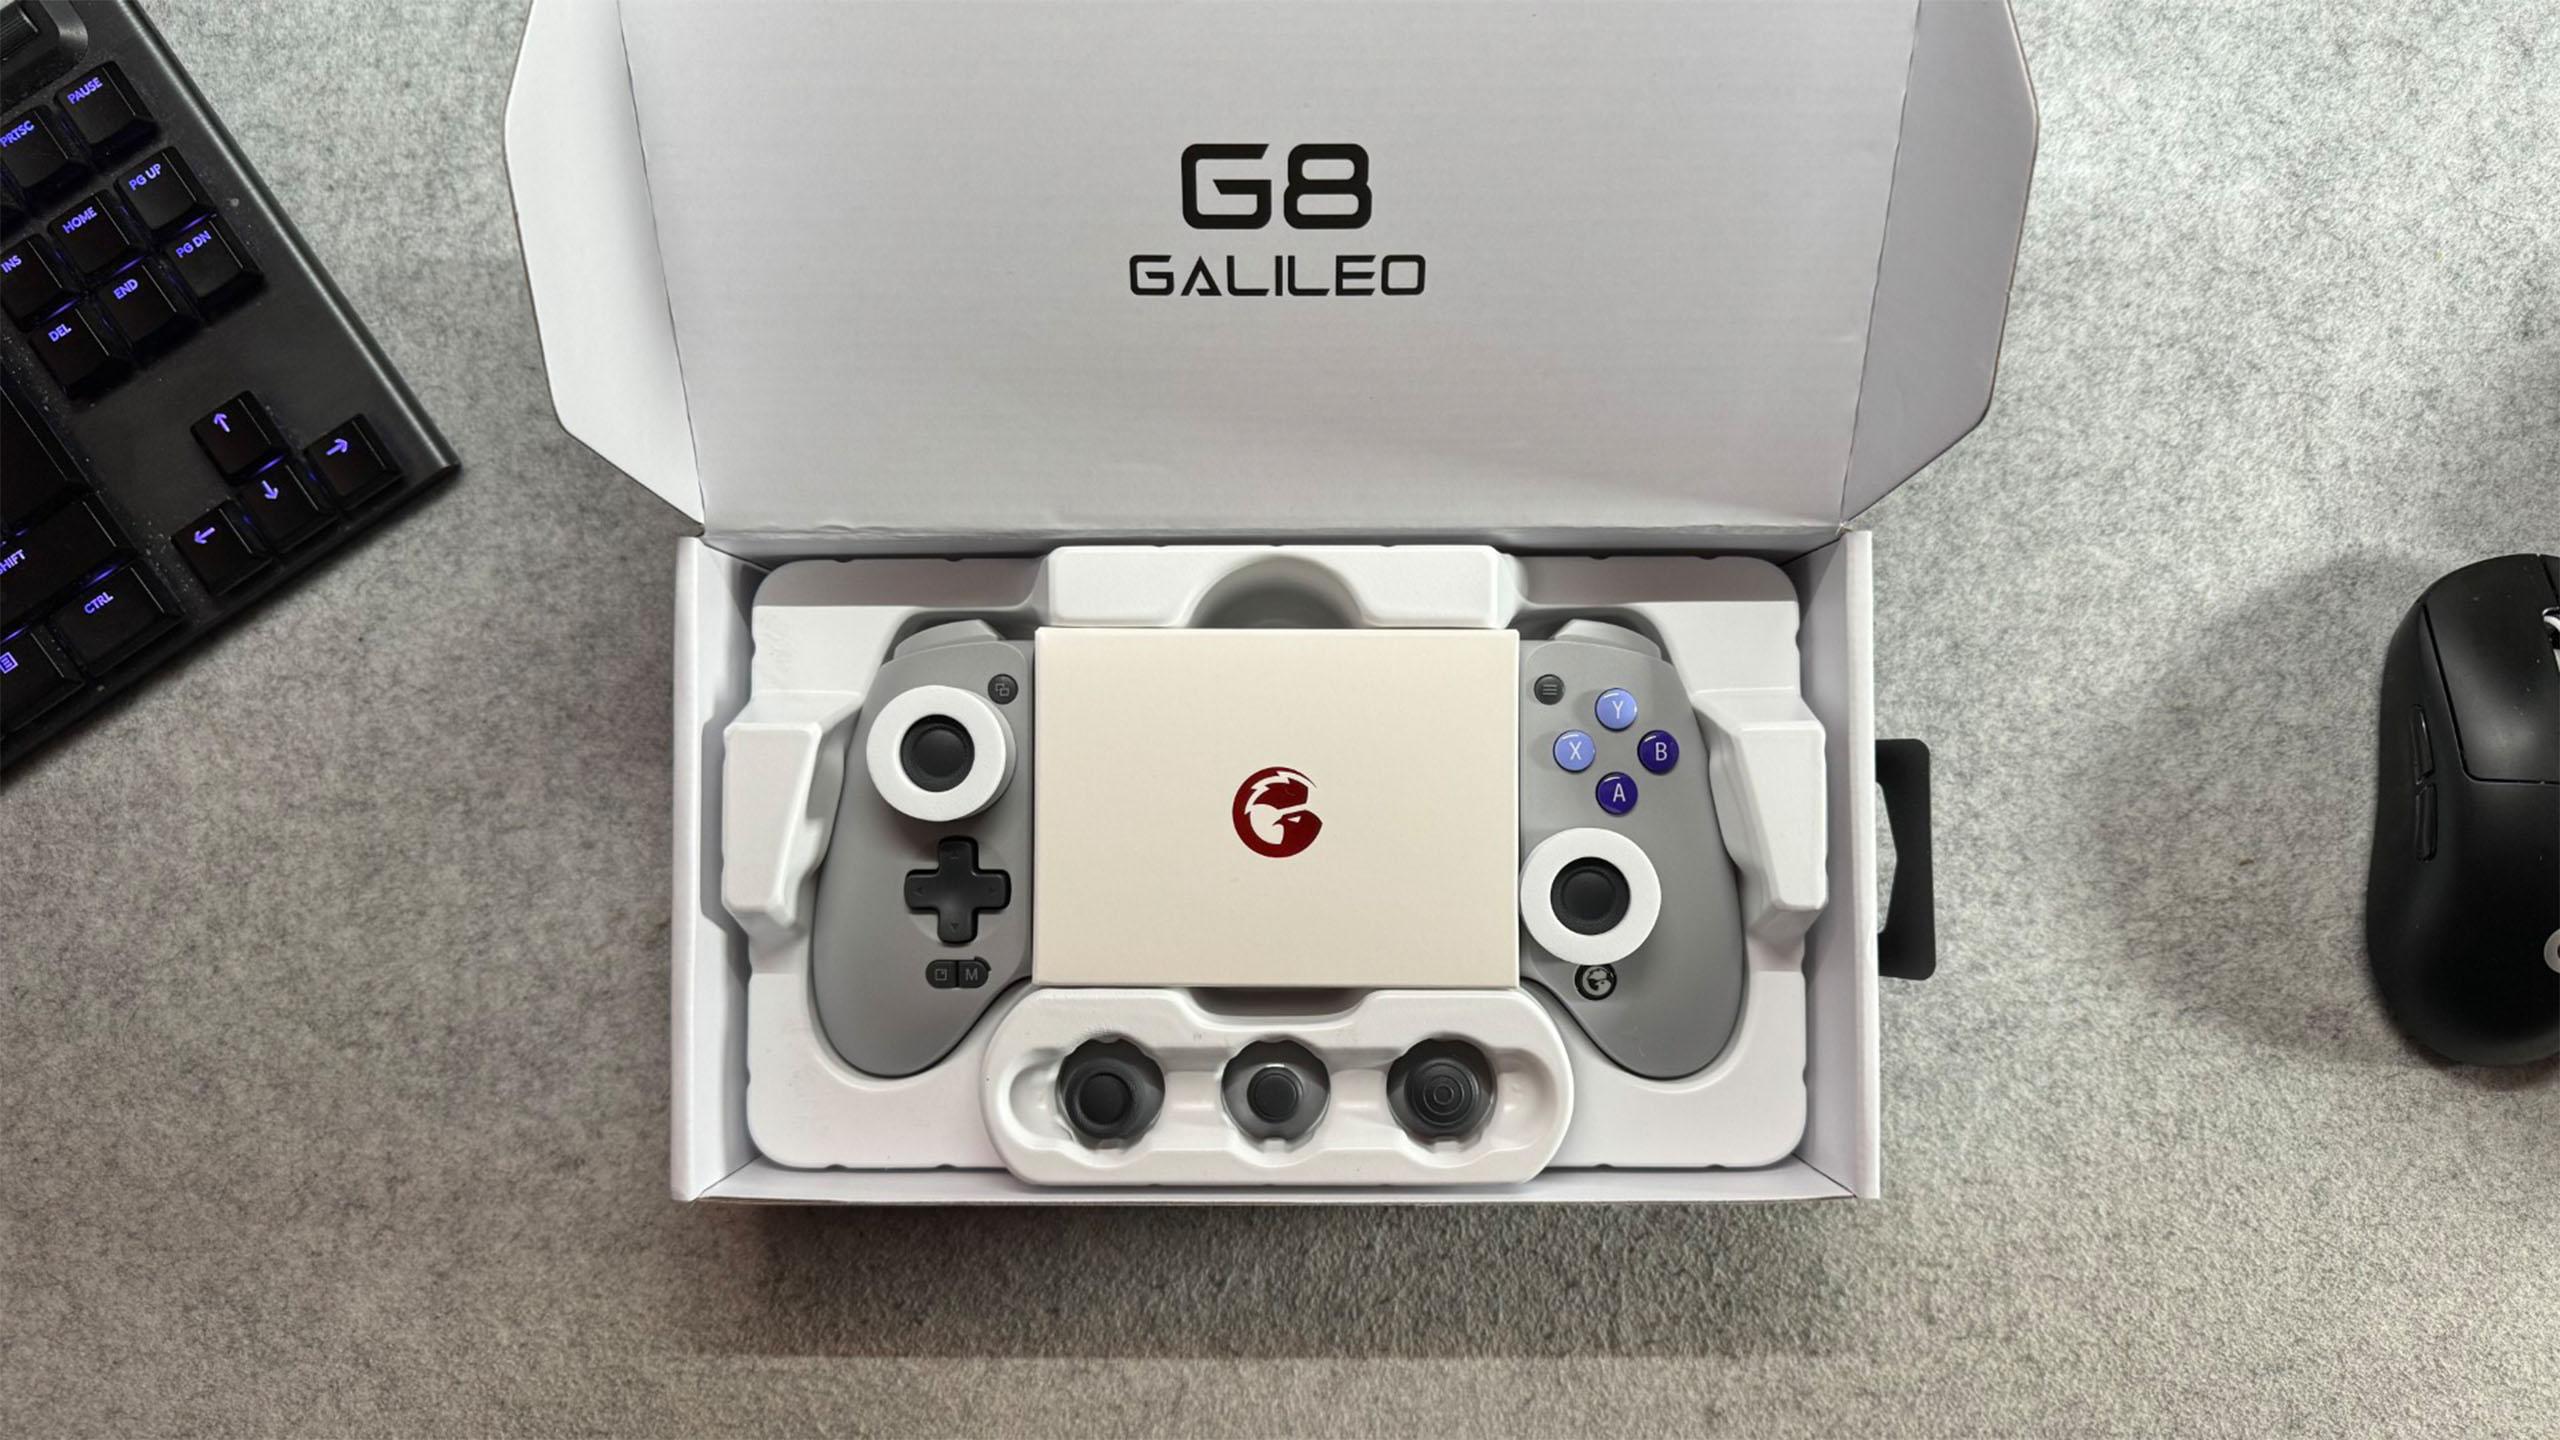 Are there are compatible buttons for the Gamesir G8 Galileo? : r/SBCGaming